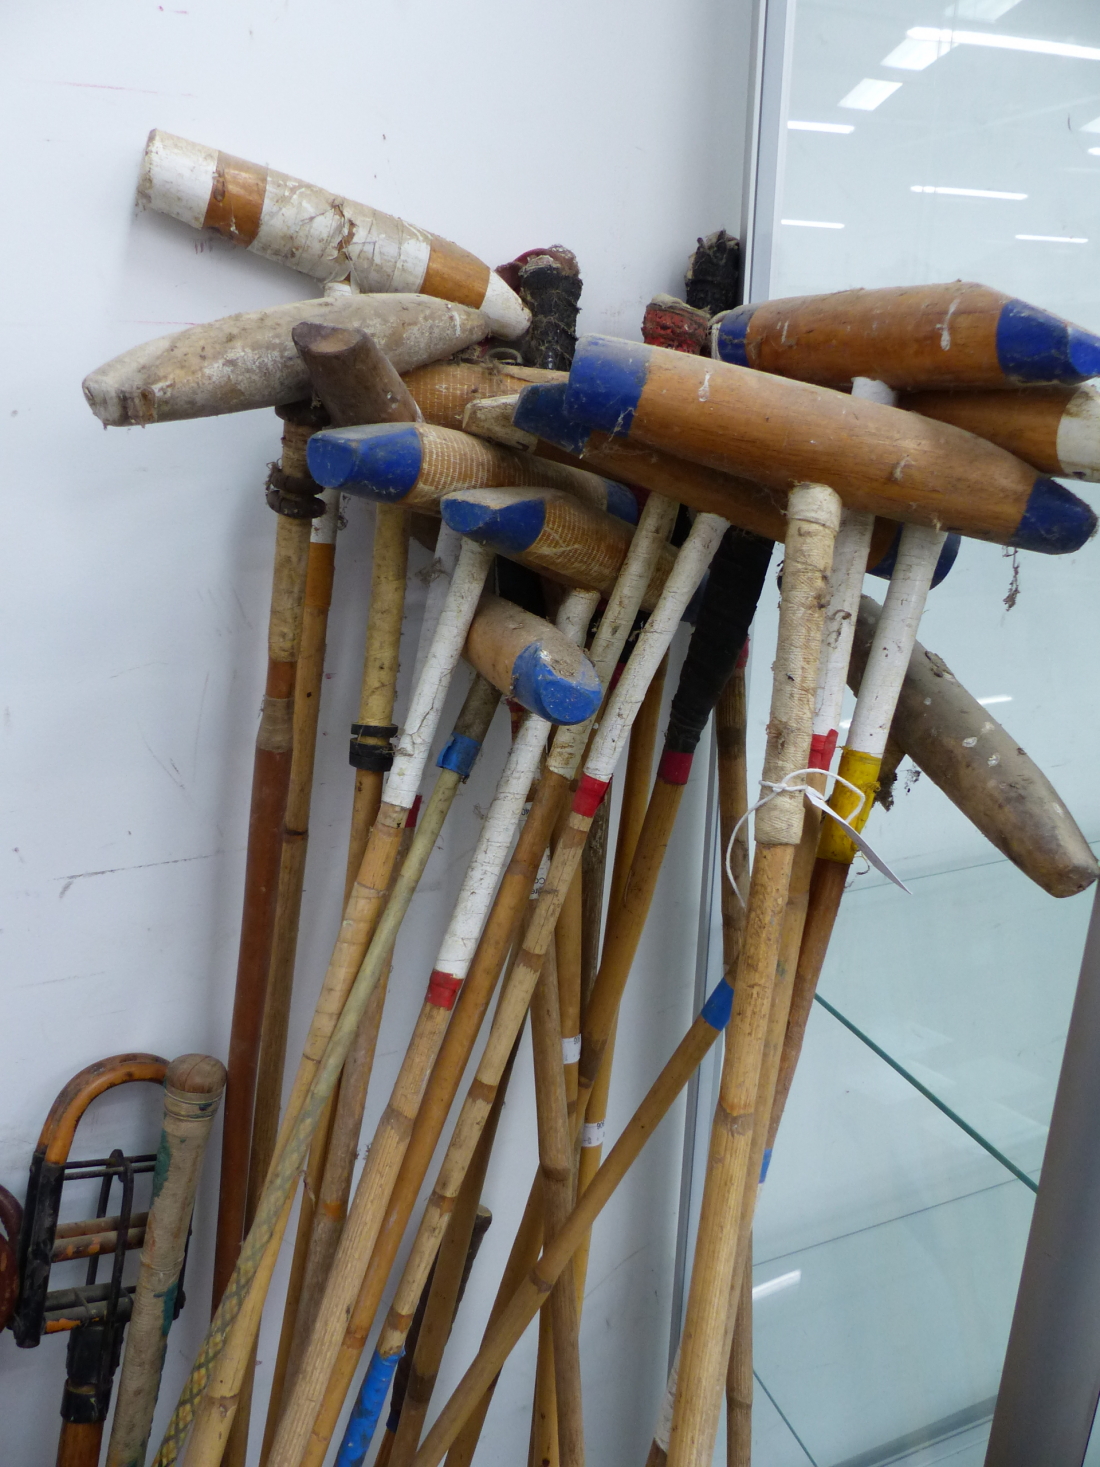 A LARGE COLLECTION OF POLO MALLETS AND HELMETS, TOGETHER WITH TWO SHOOTING STICKS, ETC (QTY).